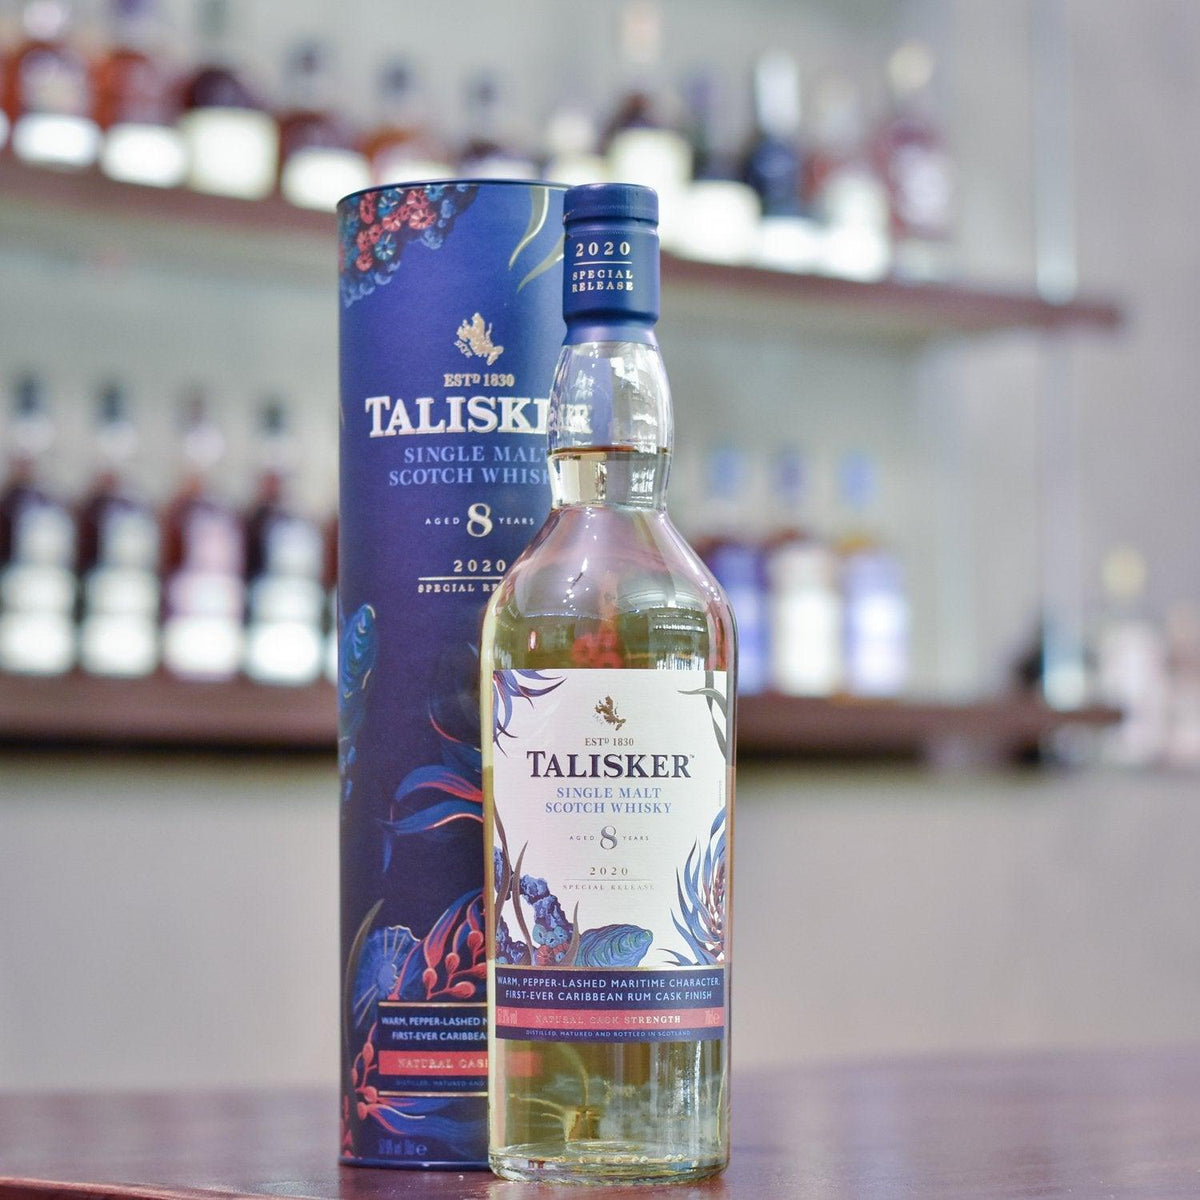 Talisker 8 Year Old Cask Strength 2020 Special Release - The Rare Malt